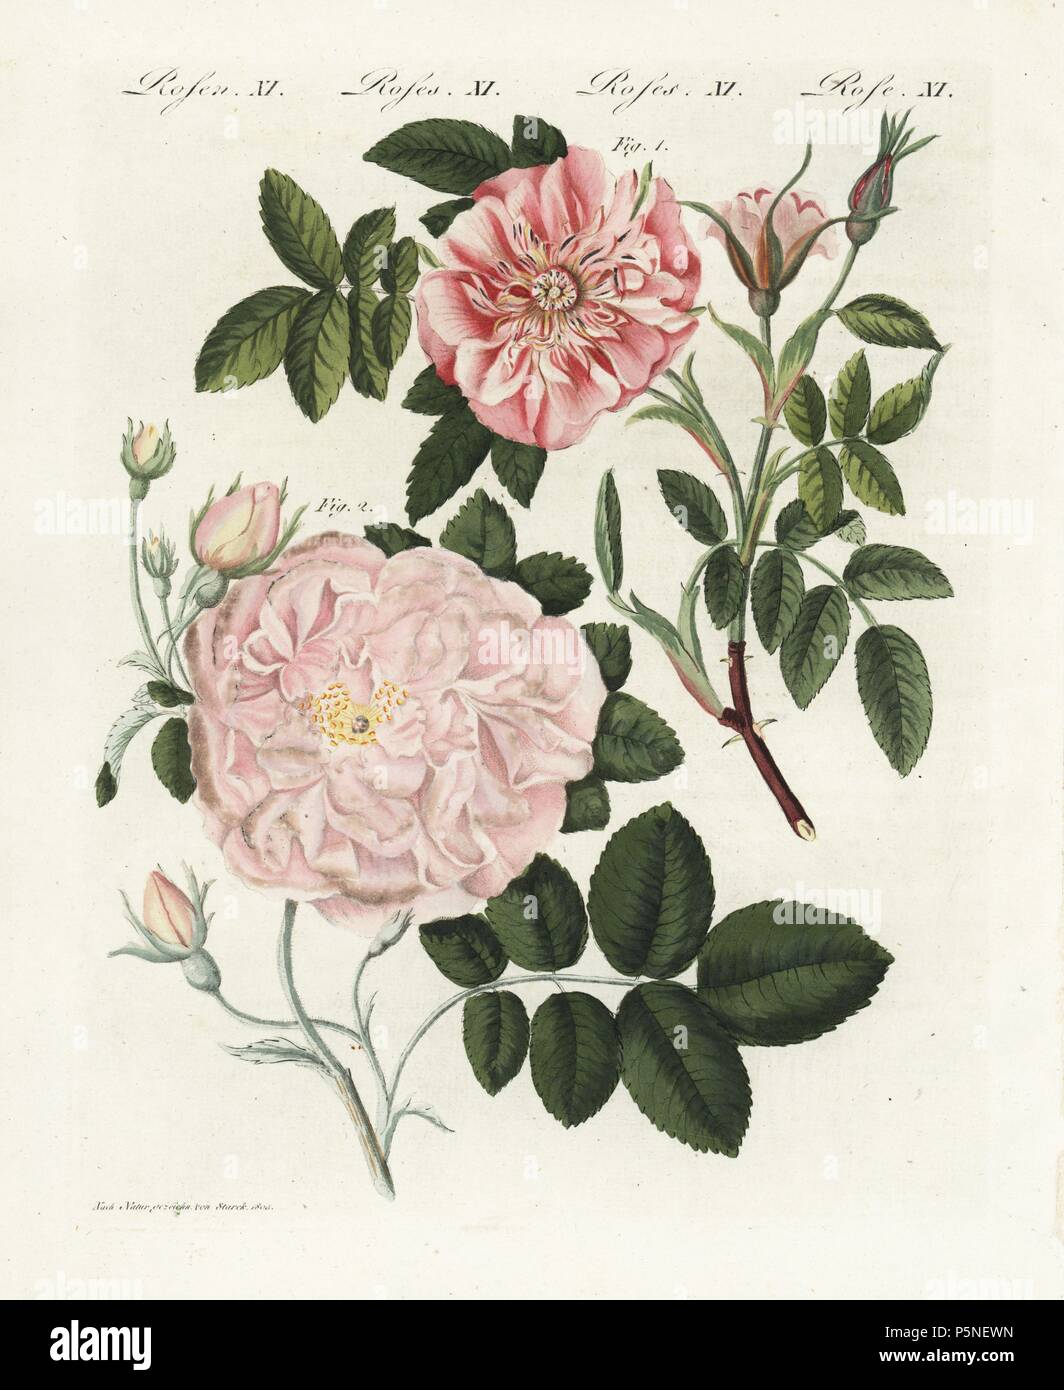 Cinnamon rose, Rosa majalis, and sweet briar, Rosa rubiginosa, Rosa umbellata flore carneo. Handcoloured copperplate engraving from an illustration drawn from nature by Stark from Bertuch's 'Bilderbuch fur Kinder' (Picture Book for Children), Weimar, 1790-1830. Friedrich Johann Bertuch (1747-1822) was a German publisher and man of arts most famous for his 12-volume encyclopedia for children illustrated with 1,200 engraved plates on natural history, science, costume, mythology, etc. Stock Photo